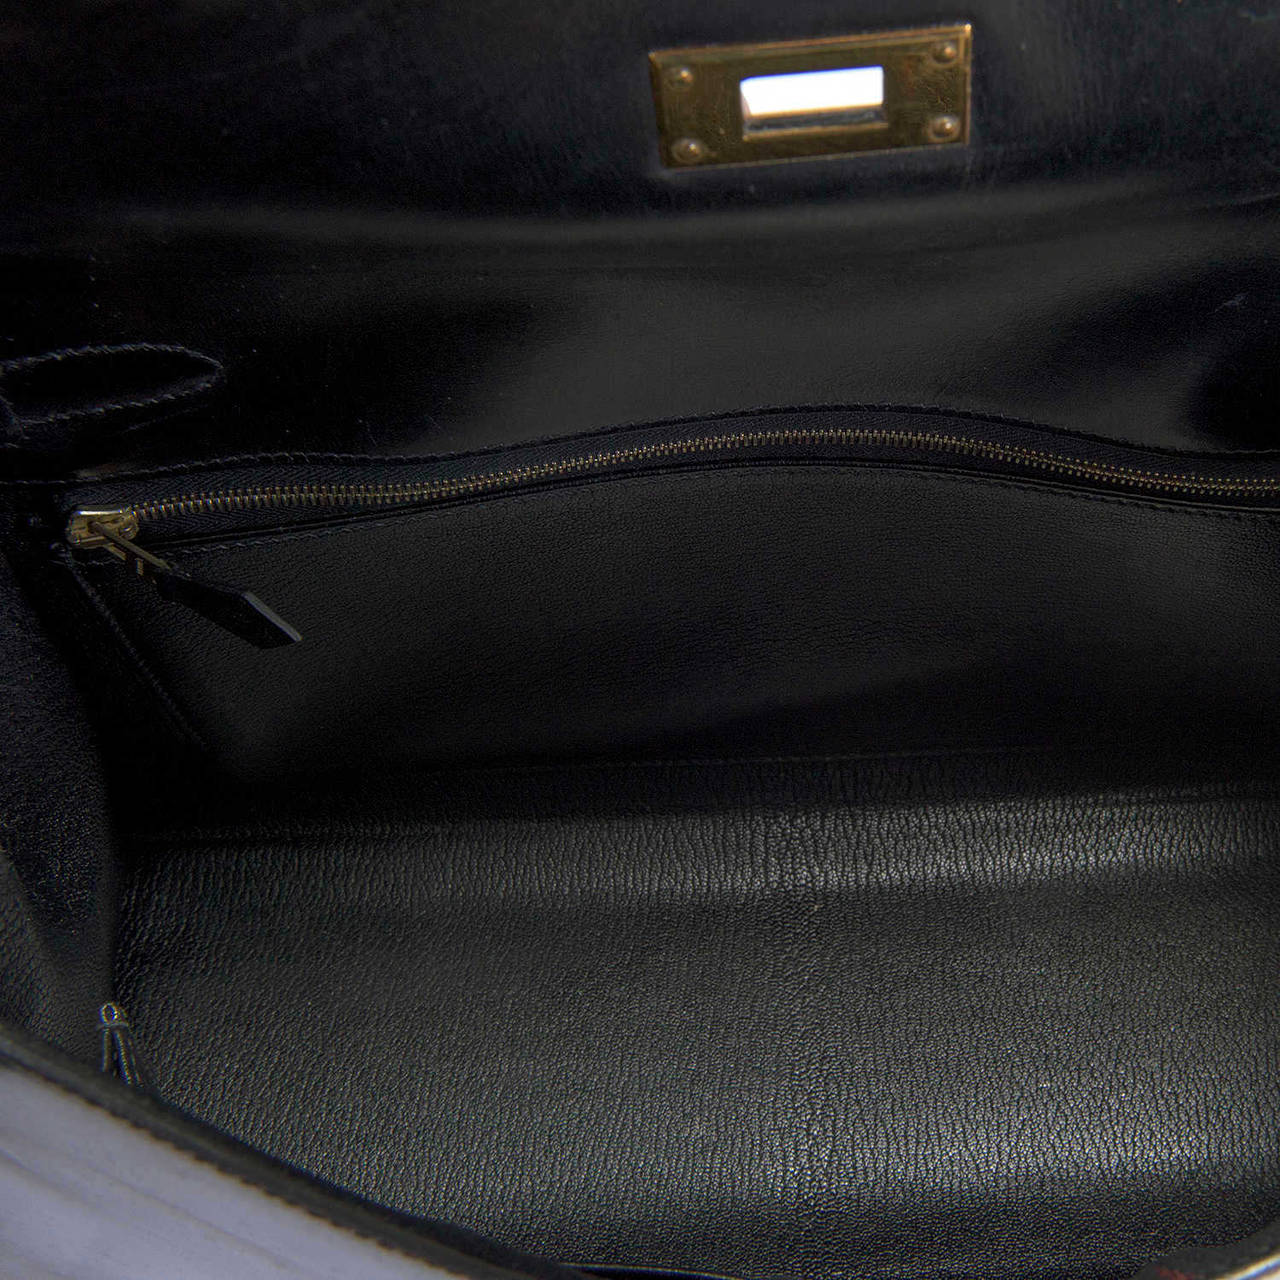 PRISTINE Hermes Kelly 33cm 'Sellier' Bag in Black Box Leather with Gold Hardware 4